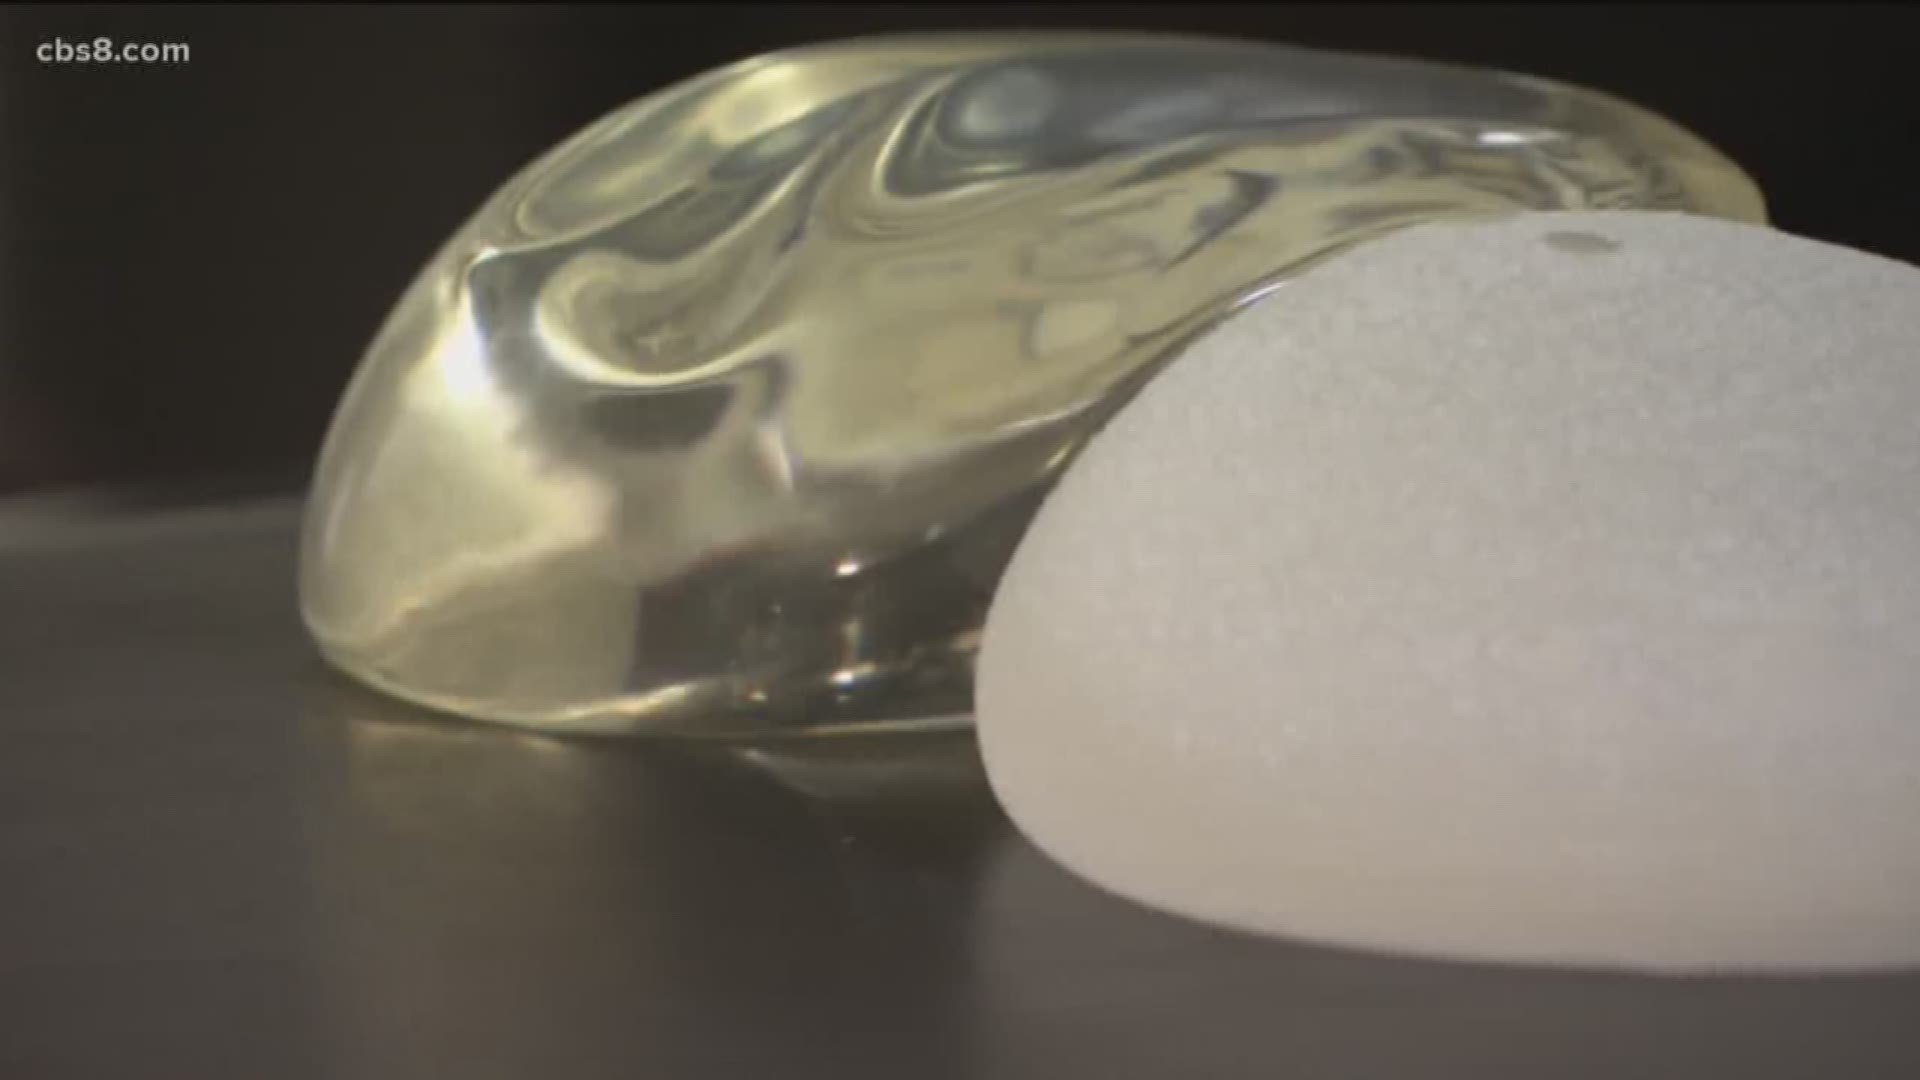 Allergan's textured breast implants are linked to a type of lymphoma and one San Diego woman says 20 years after getting the implants, the symptoms surfaced, one right after the other.